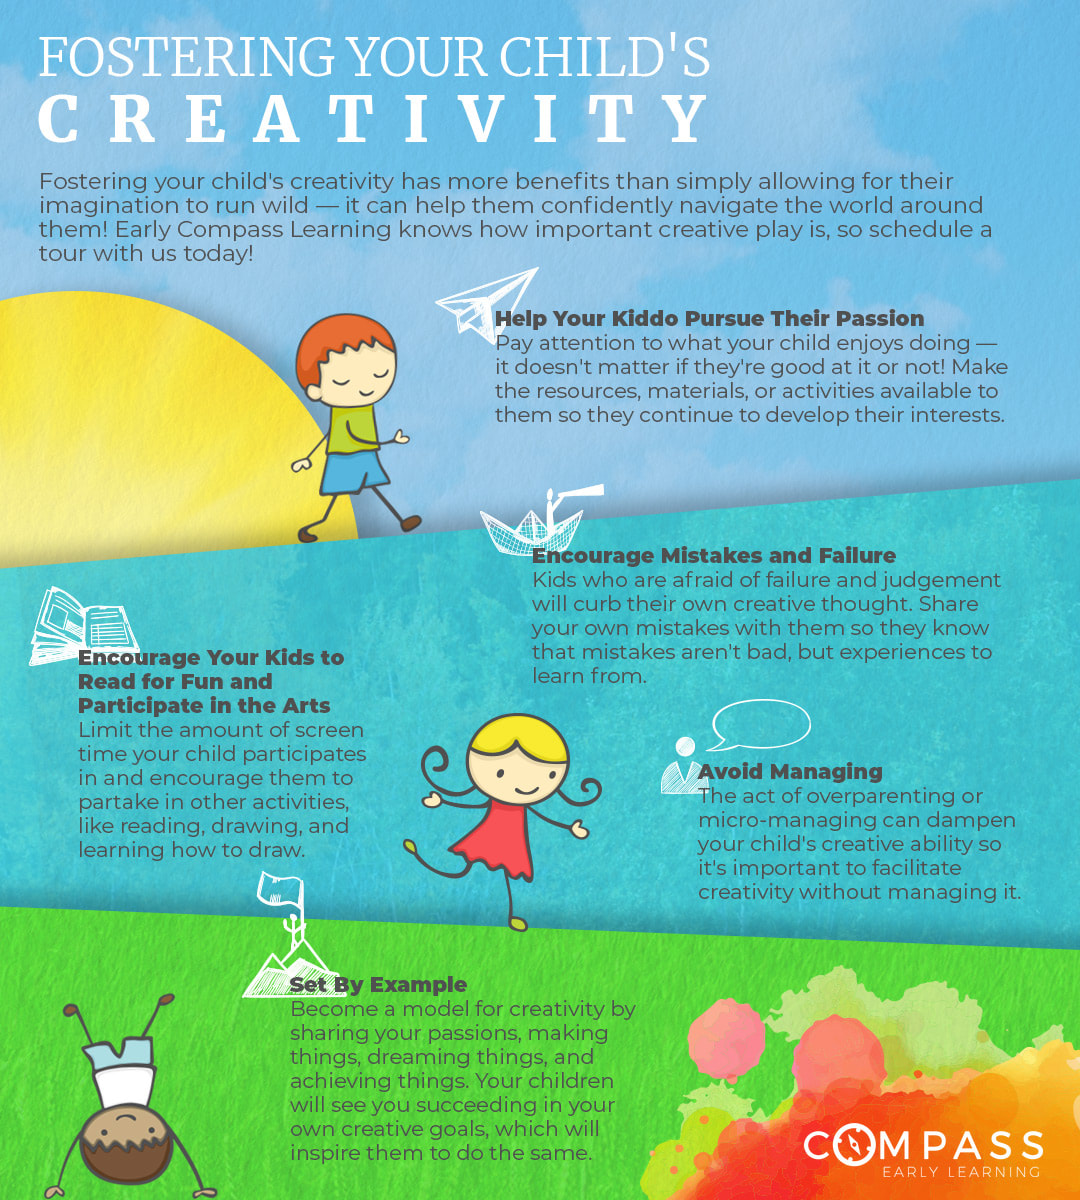 III. How to Identify and Nurture a Child's Creative Potential